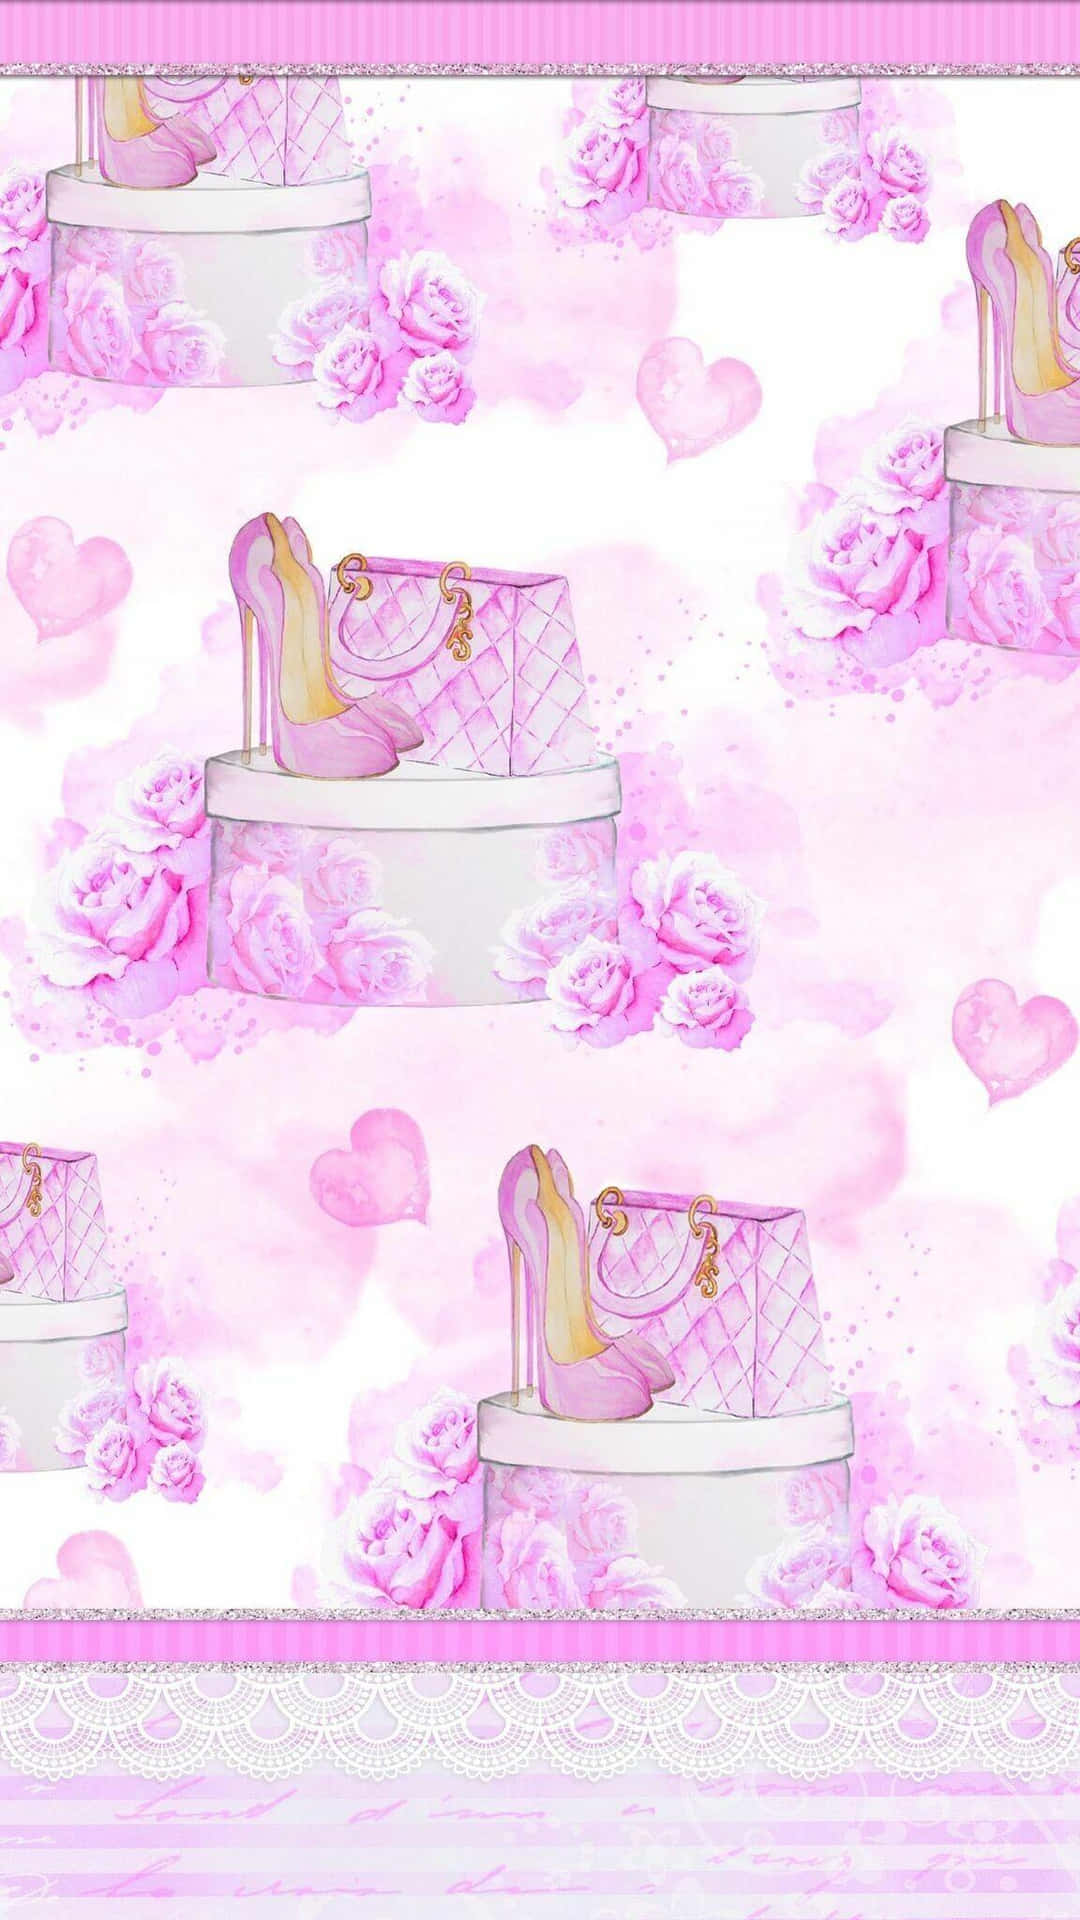 Pink Roses And Shoes On A Pink Background Wallpaper